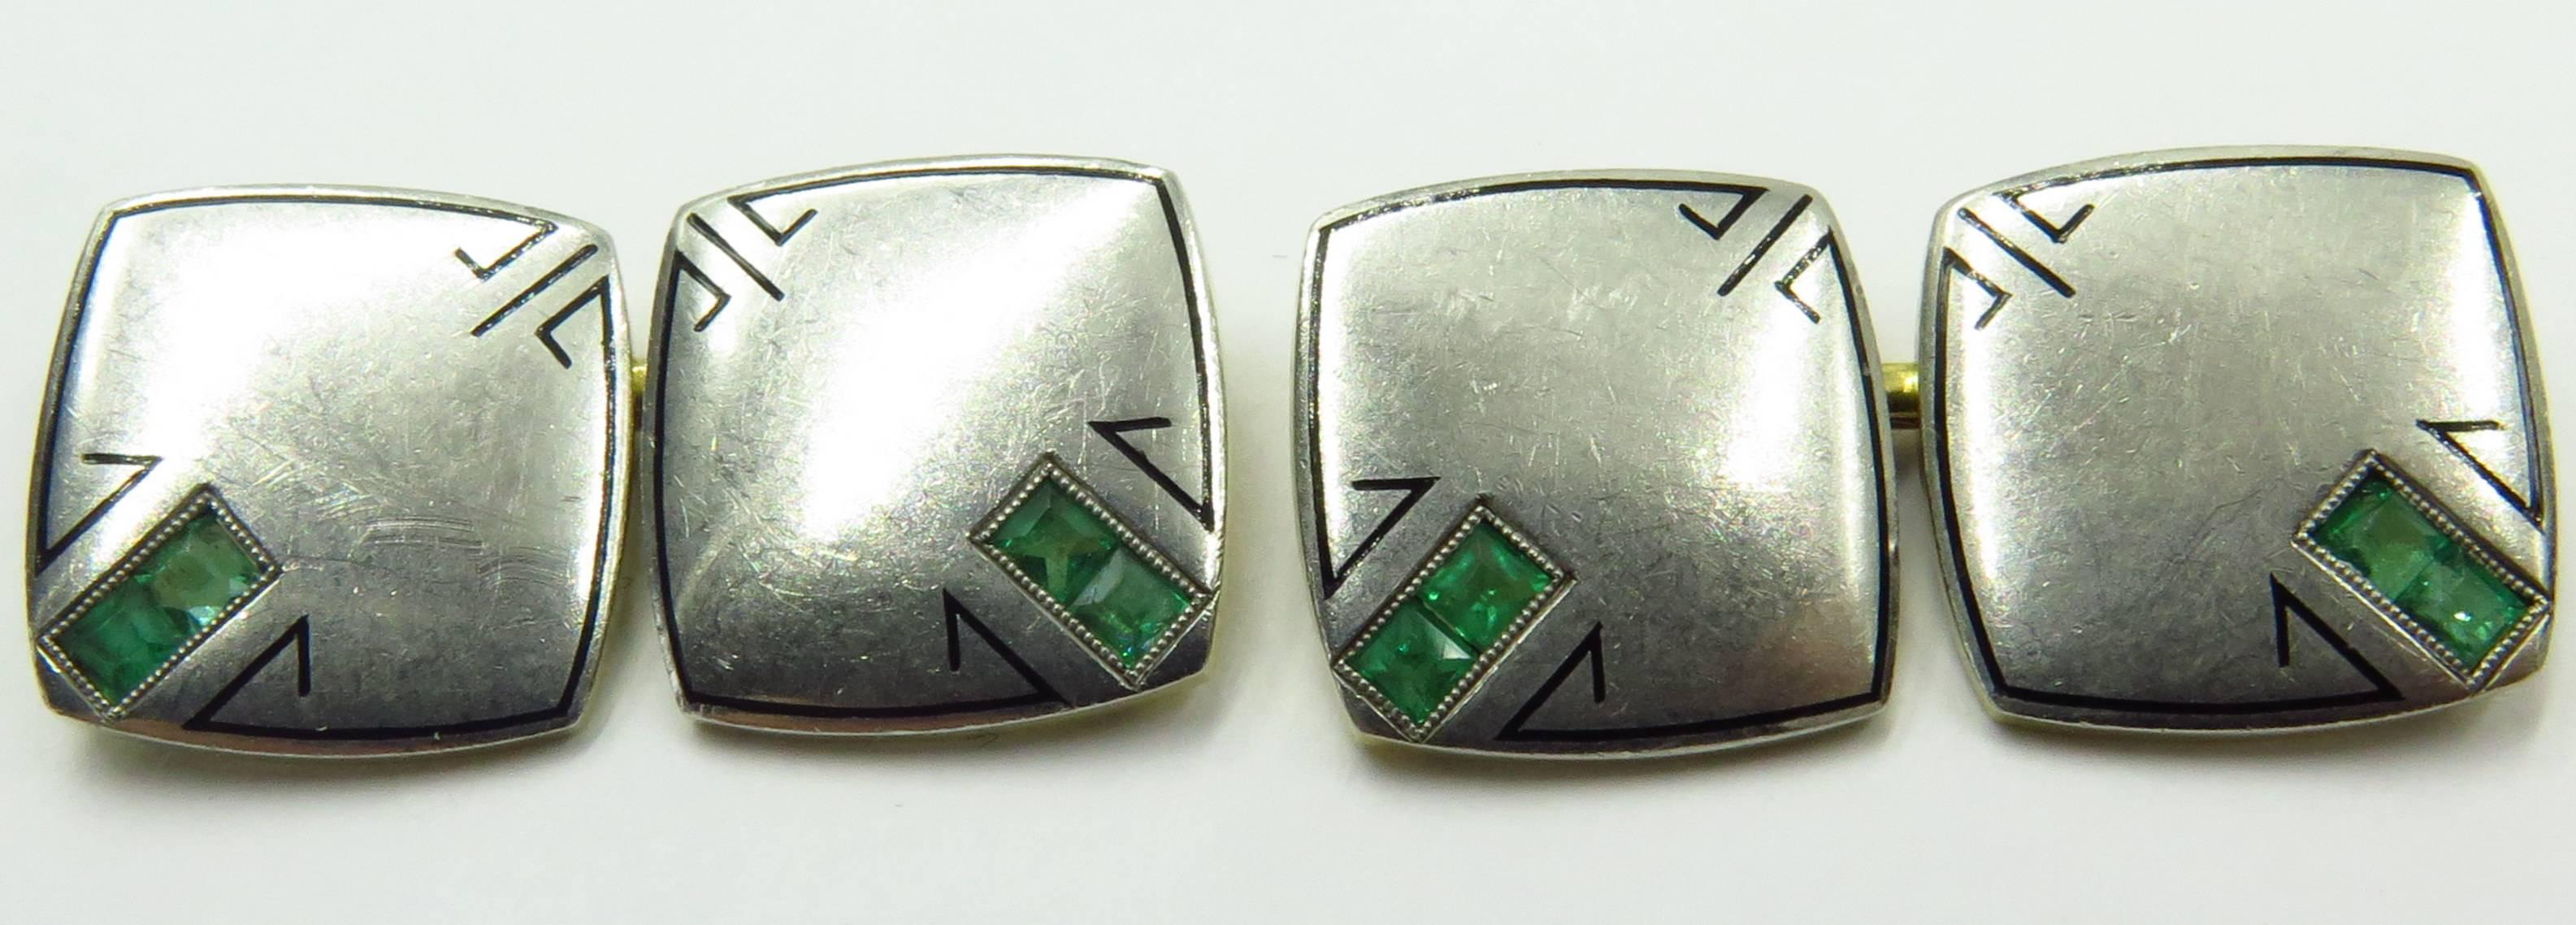 These elegant double sided cufflinks have a very strong arts & crafts period design. Each plaque has 2 square cut emeralds They also contain a platinum and gold mark. There are the initials A.T.S. on the inside of the cufflinks, presumably the